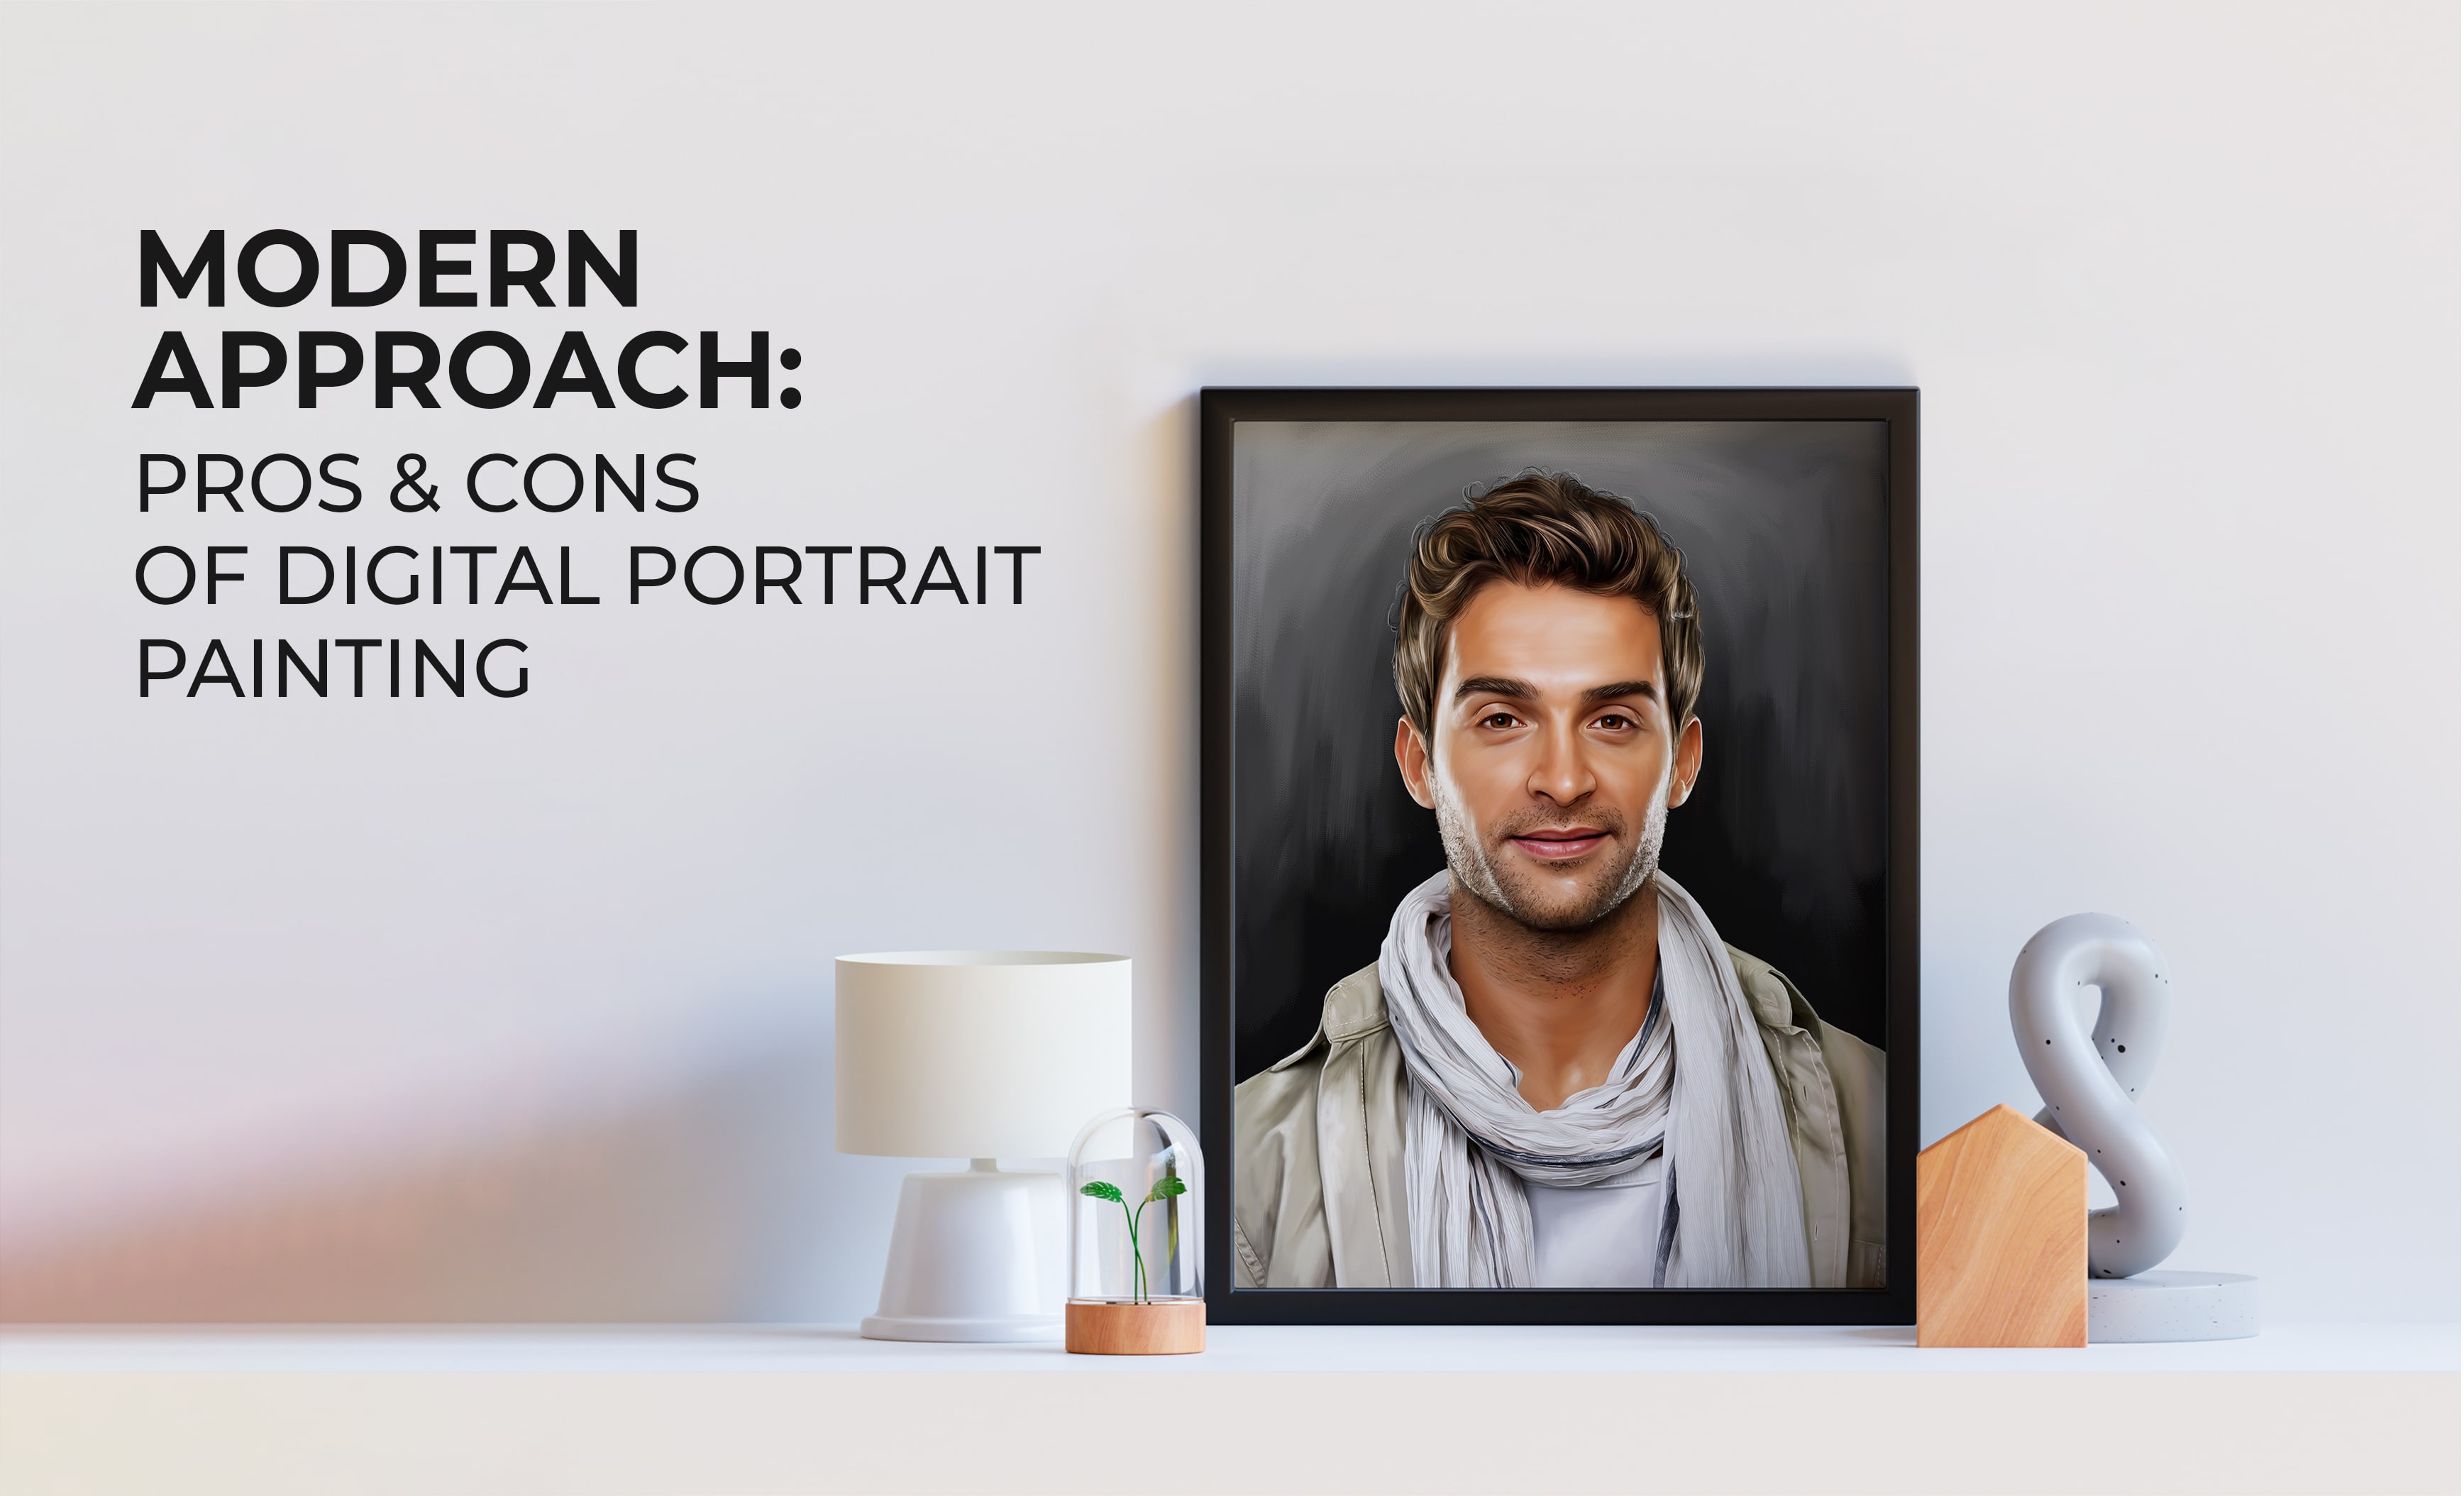 Modern Approach: Pros & Cons of Digital Portrait Painting